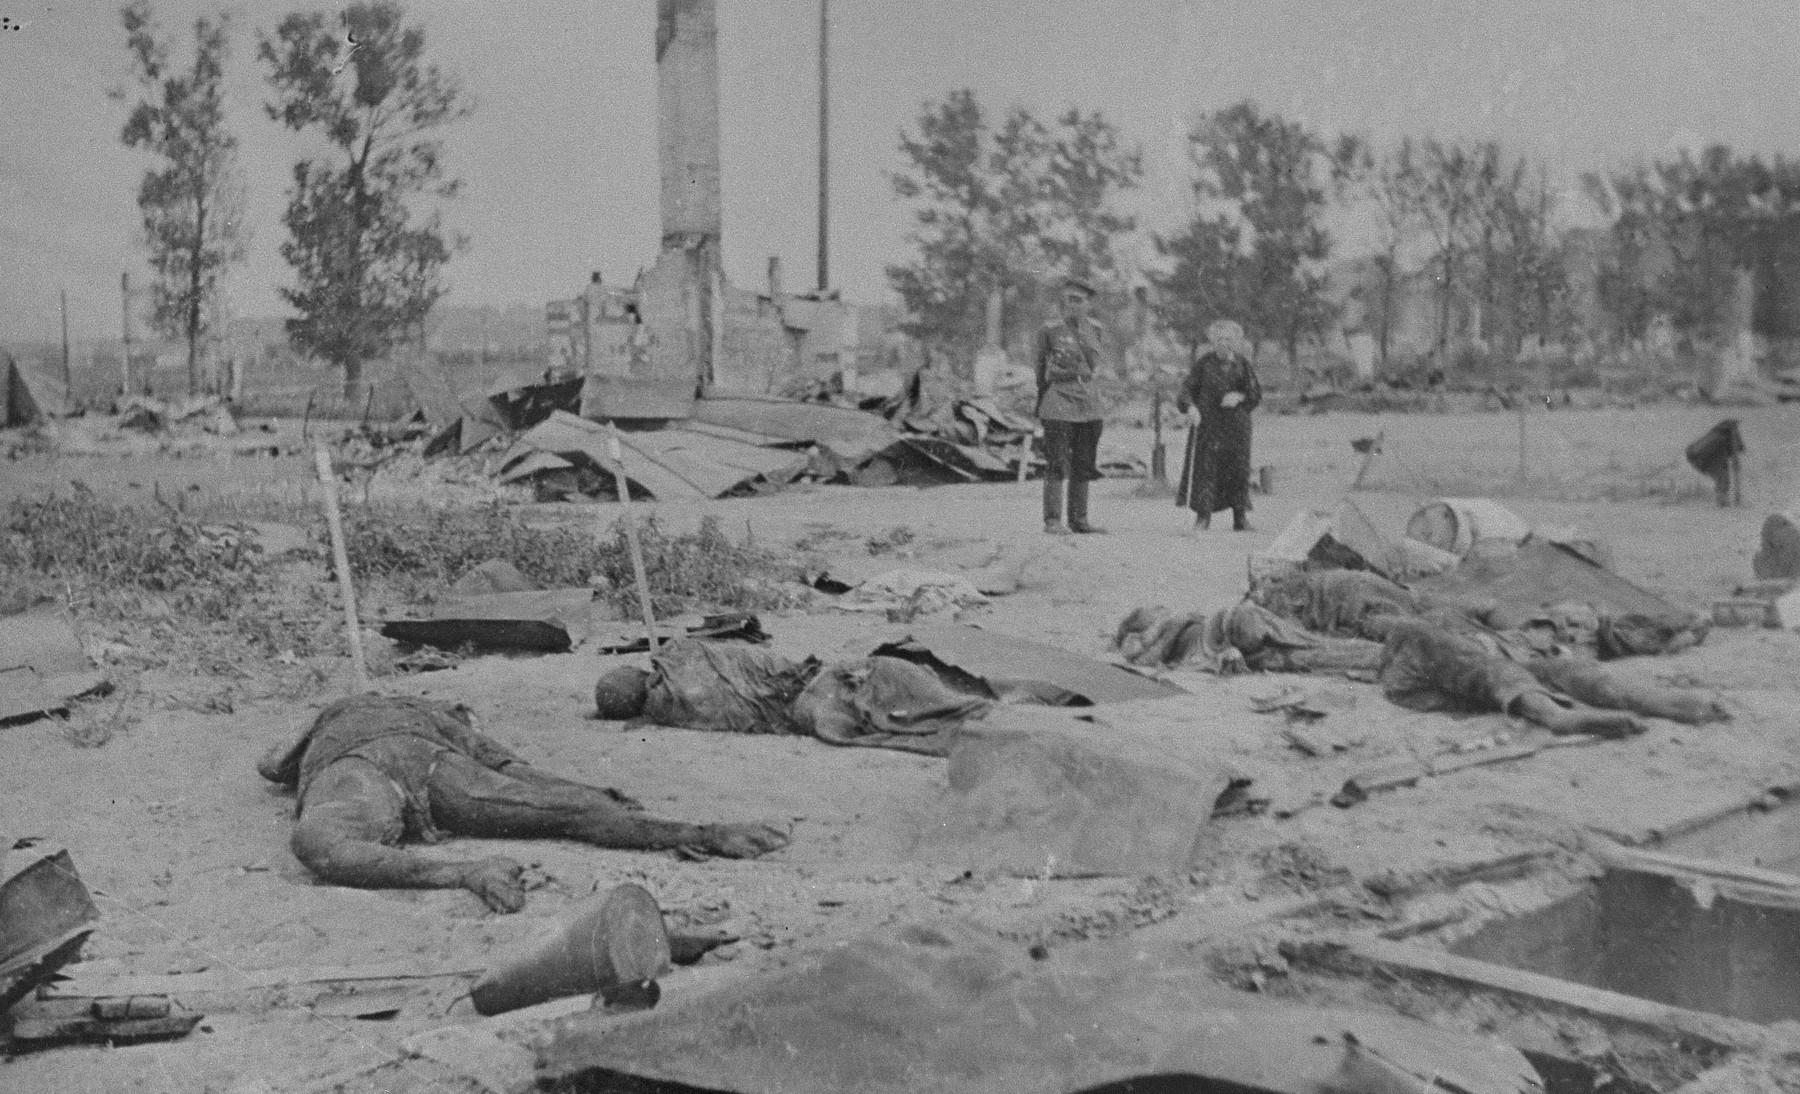 A Russian officer and an elderly woman view the devastation that resulted from the razing of the Kovno ghetto.  Charred human remains are strewn among the rubble.